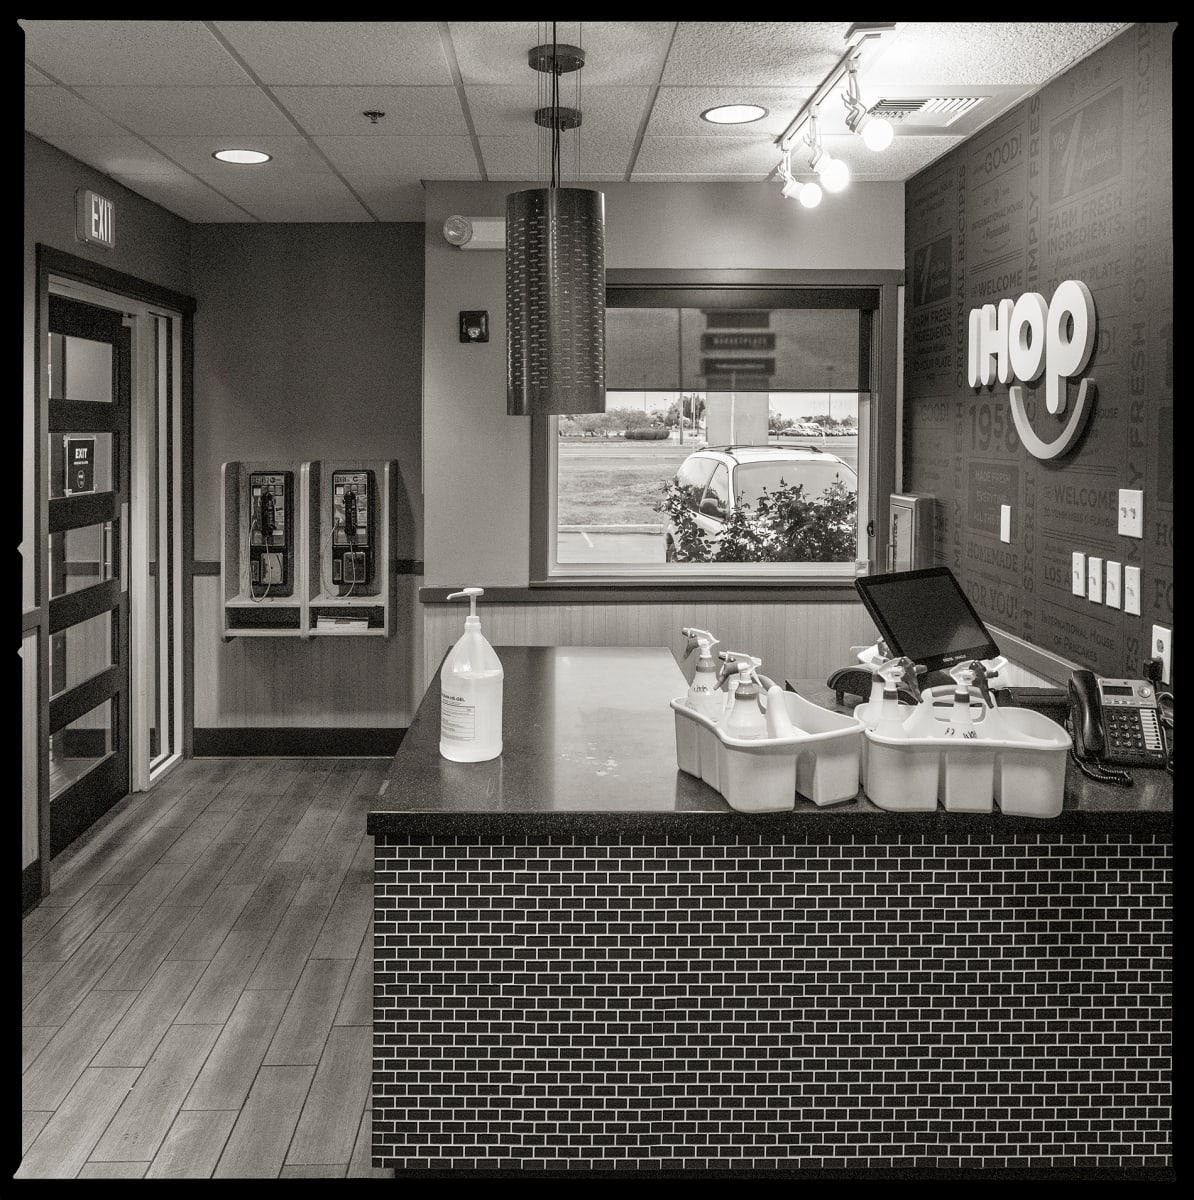 585.427.9524 & 585.427.9342 – IHOP, 556 Jefferson Road, Henrietta, NY, 14623 by Eric T. Kunsman  Image: ID: A black and white image shows an IHOP counter.  To the left, in the back there are two pay phones mounted on the wall.  To the right, there is a large white IHOP sign behind the counter on the wall.